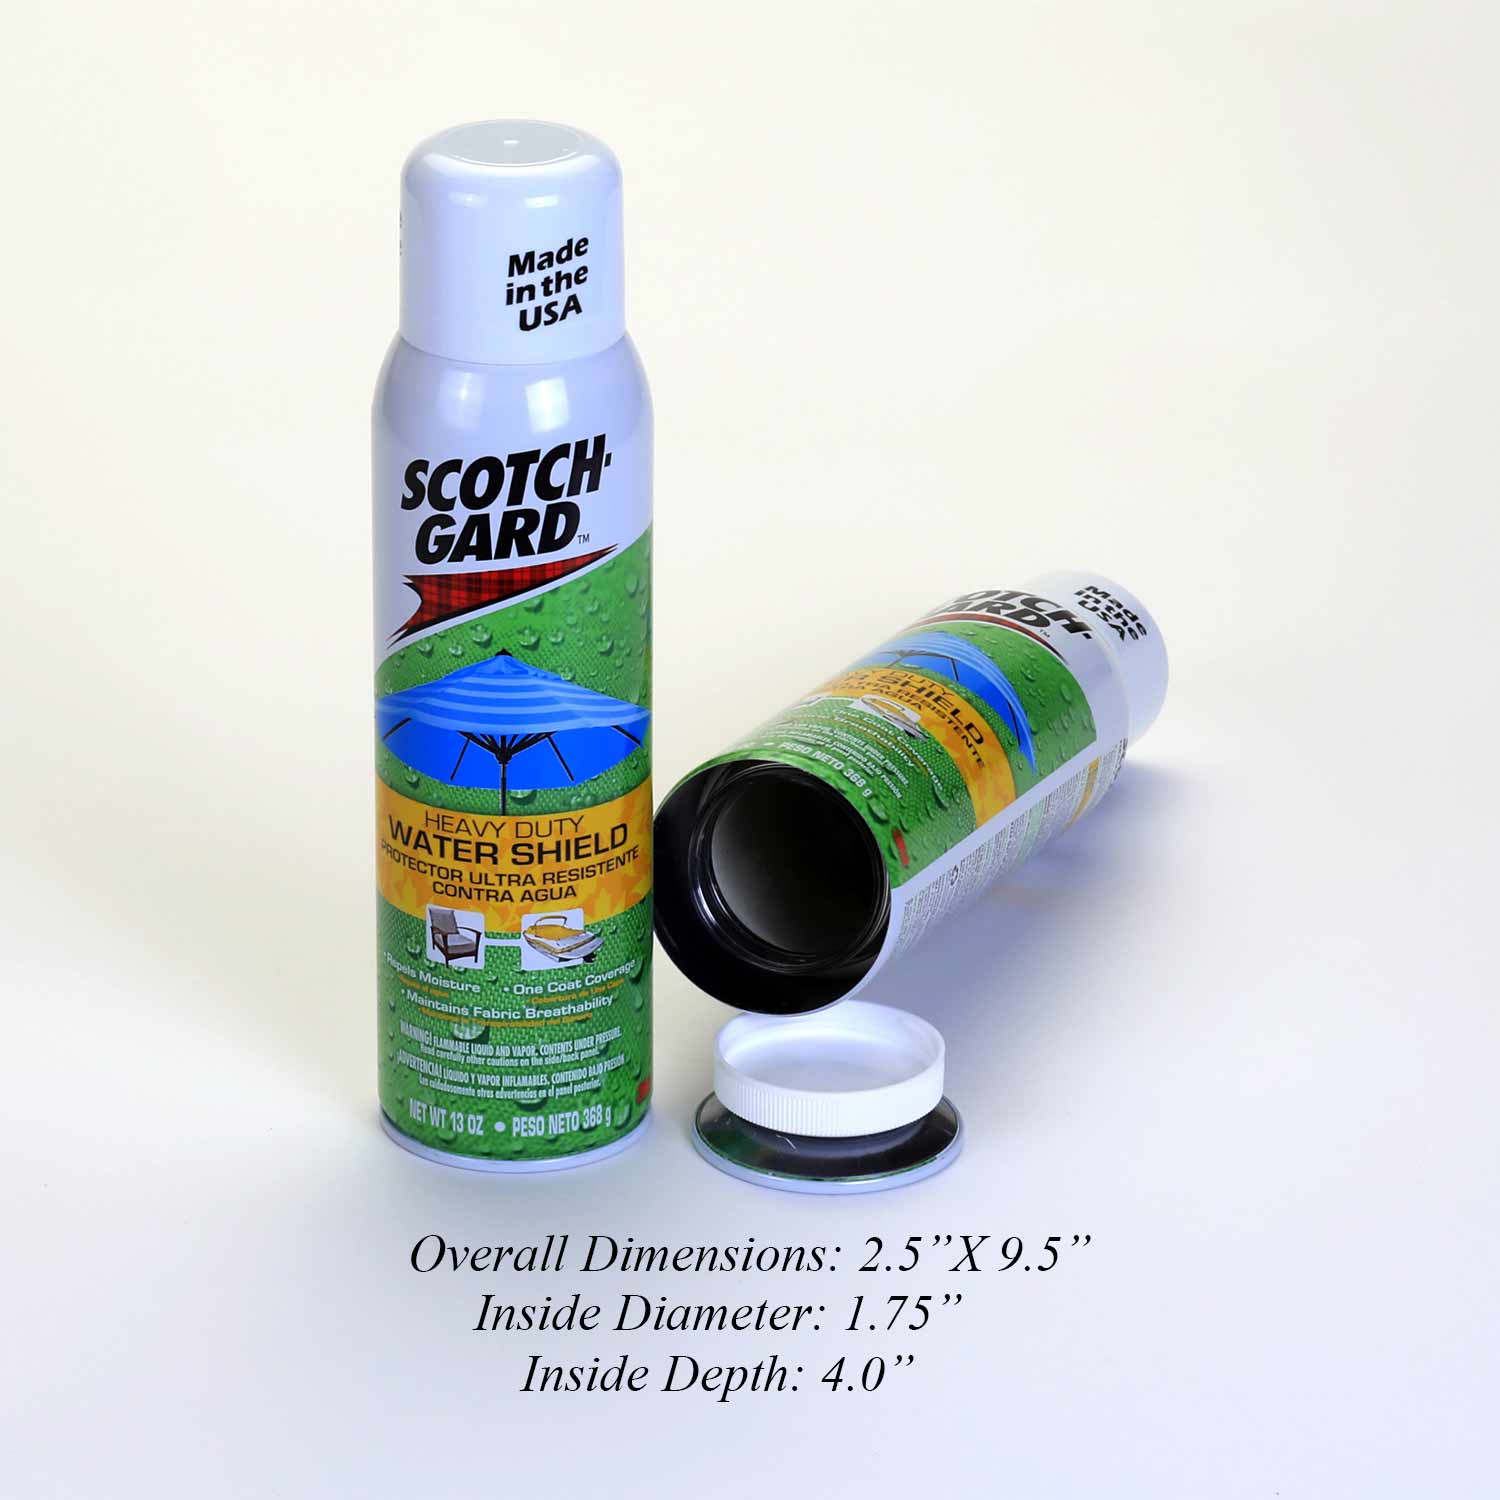 Scotch Gard - Water Shield - Diversion Safe - Southwest Specialty Products:  Your Home Security and Diversion Can Safe Manufacturing Experts